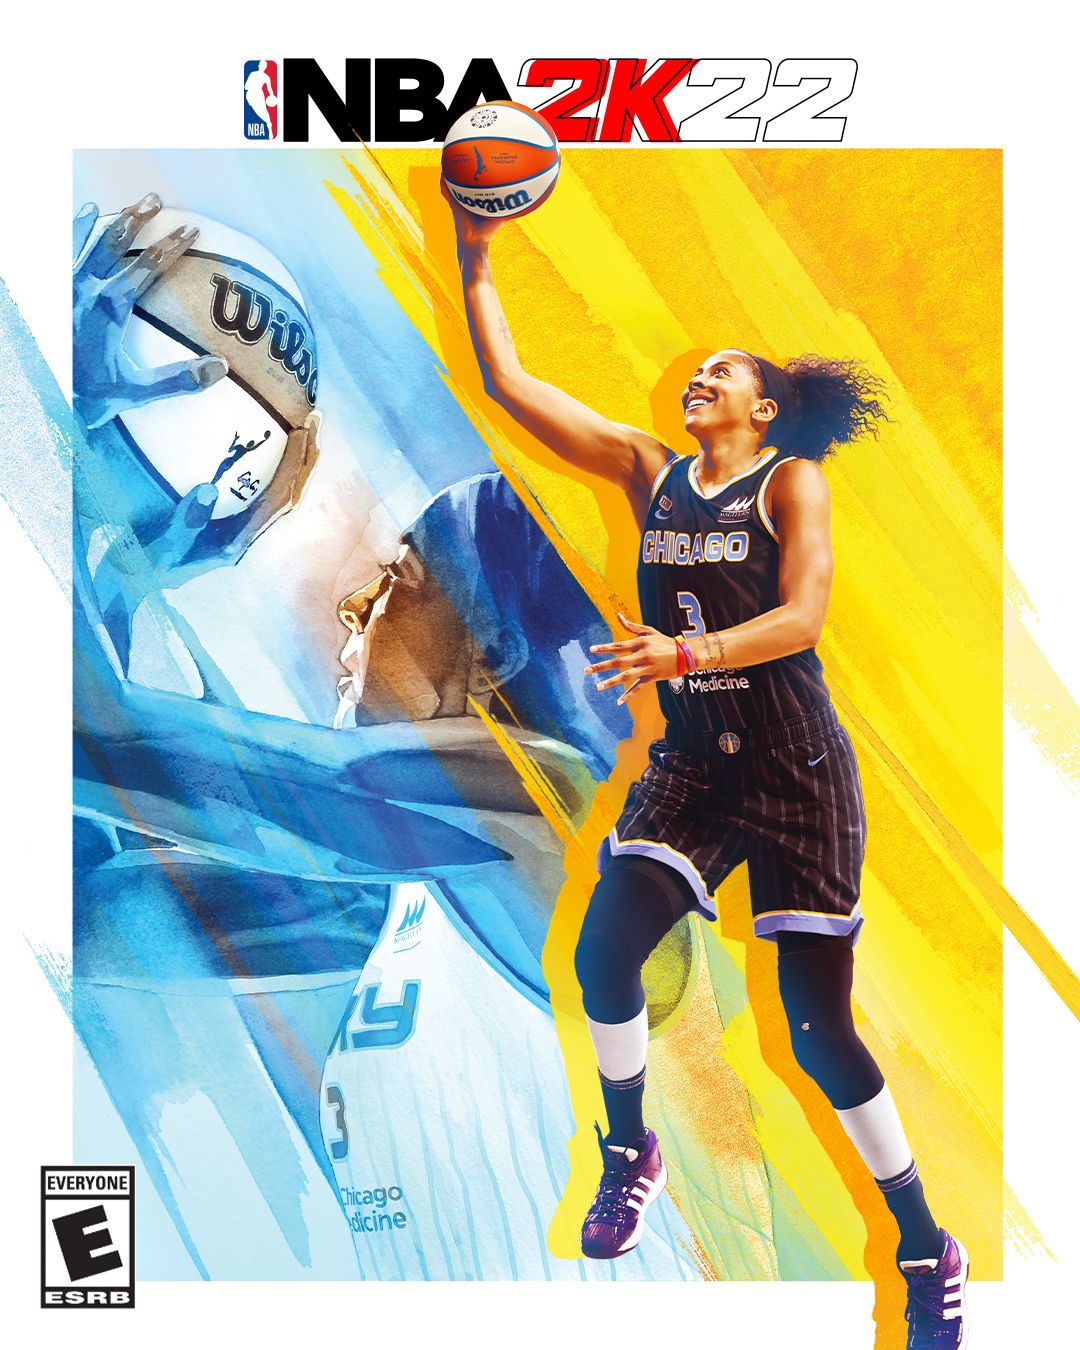 Candace Parker is the first woman cover athlete on an NBA 2K game.